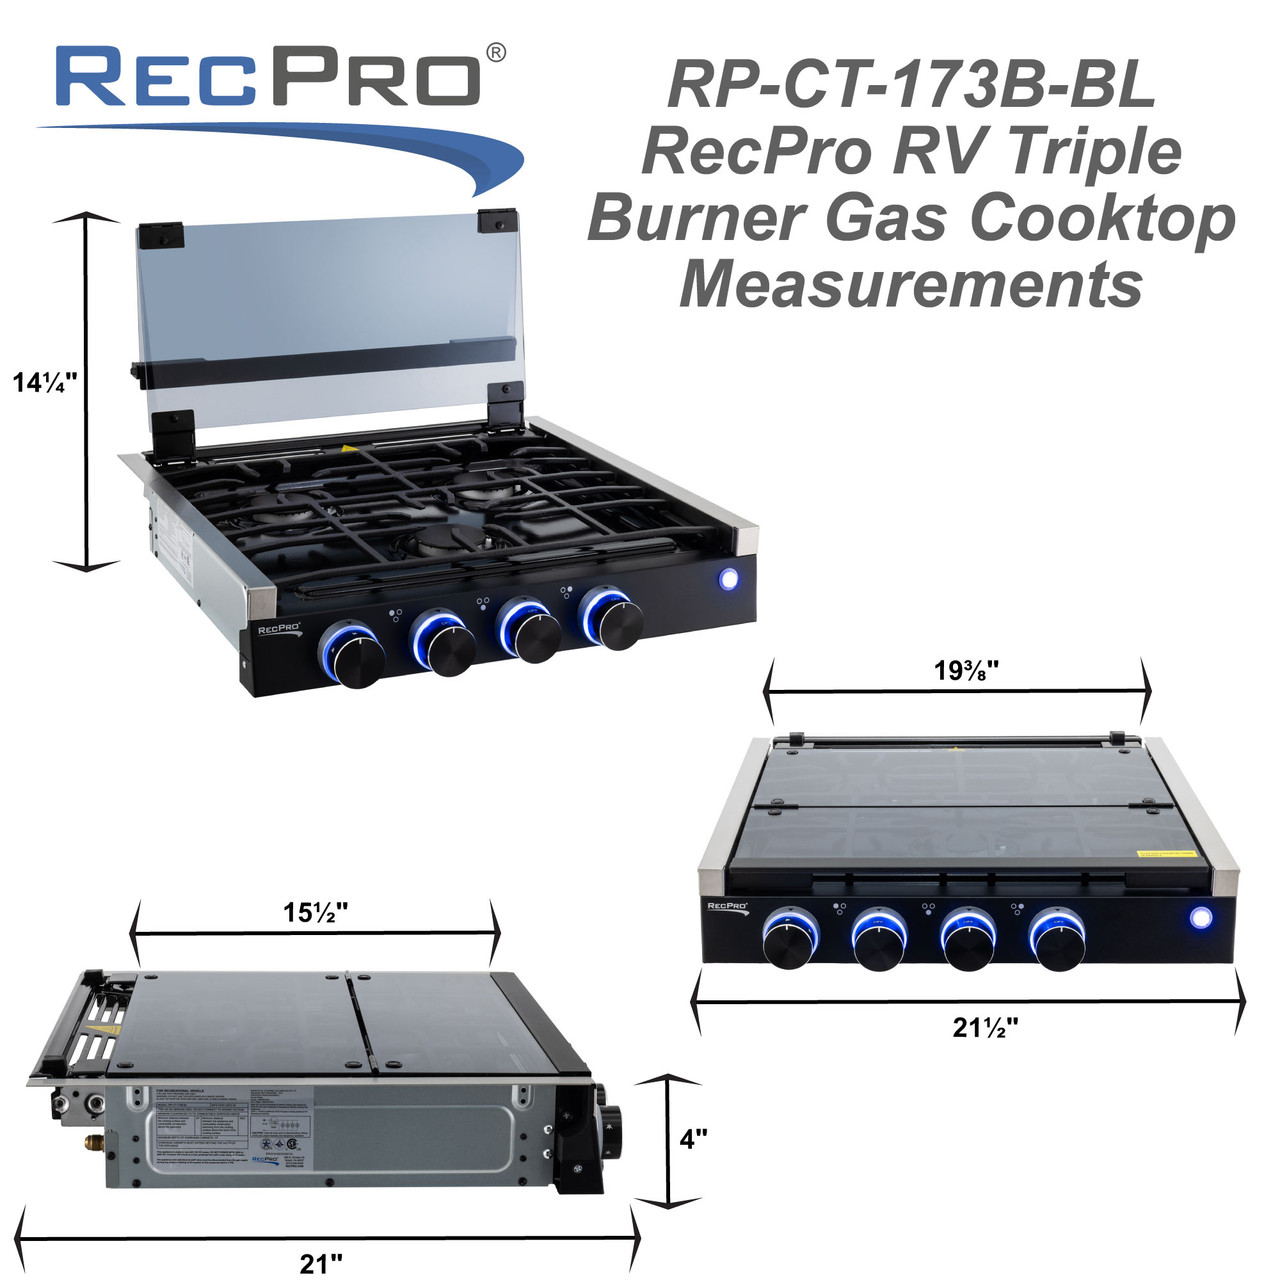 https://cdn11.bigcommerce.com/s-kwuh809851/images/stencil/1280x1280/products/2755/33334/RP-CT-173B-BL-RV-Triple-Burner-Gas-Cooktop-Measurements__60117.1701280385.jpg?c=2&imbypass=on